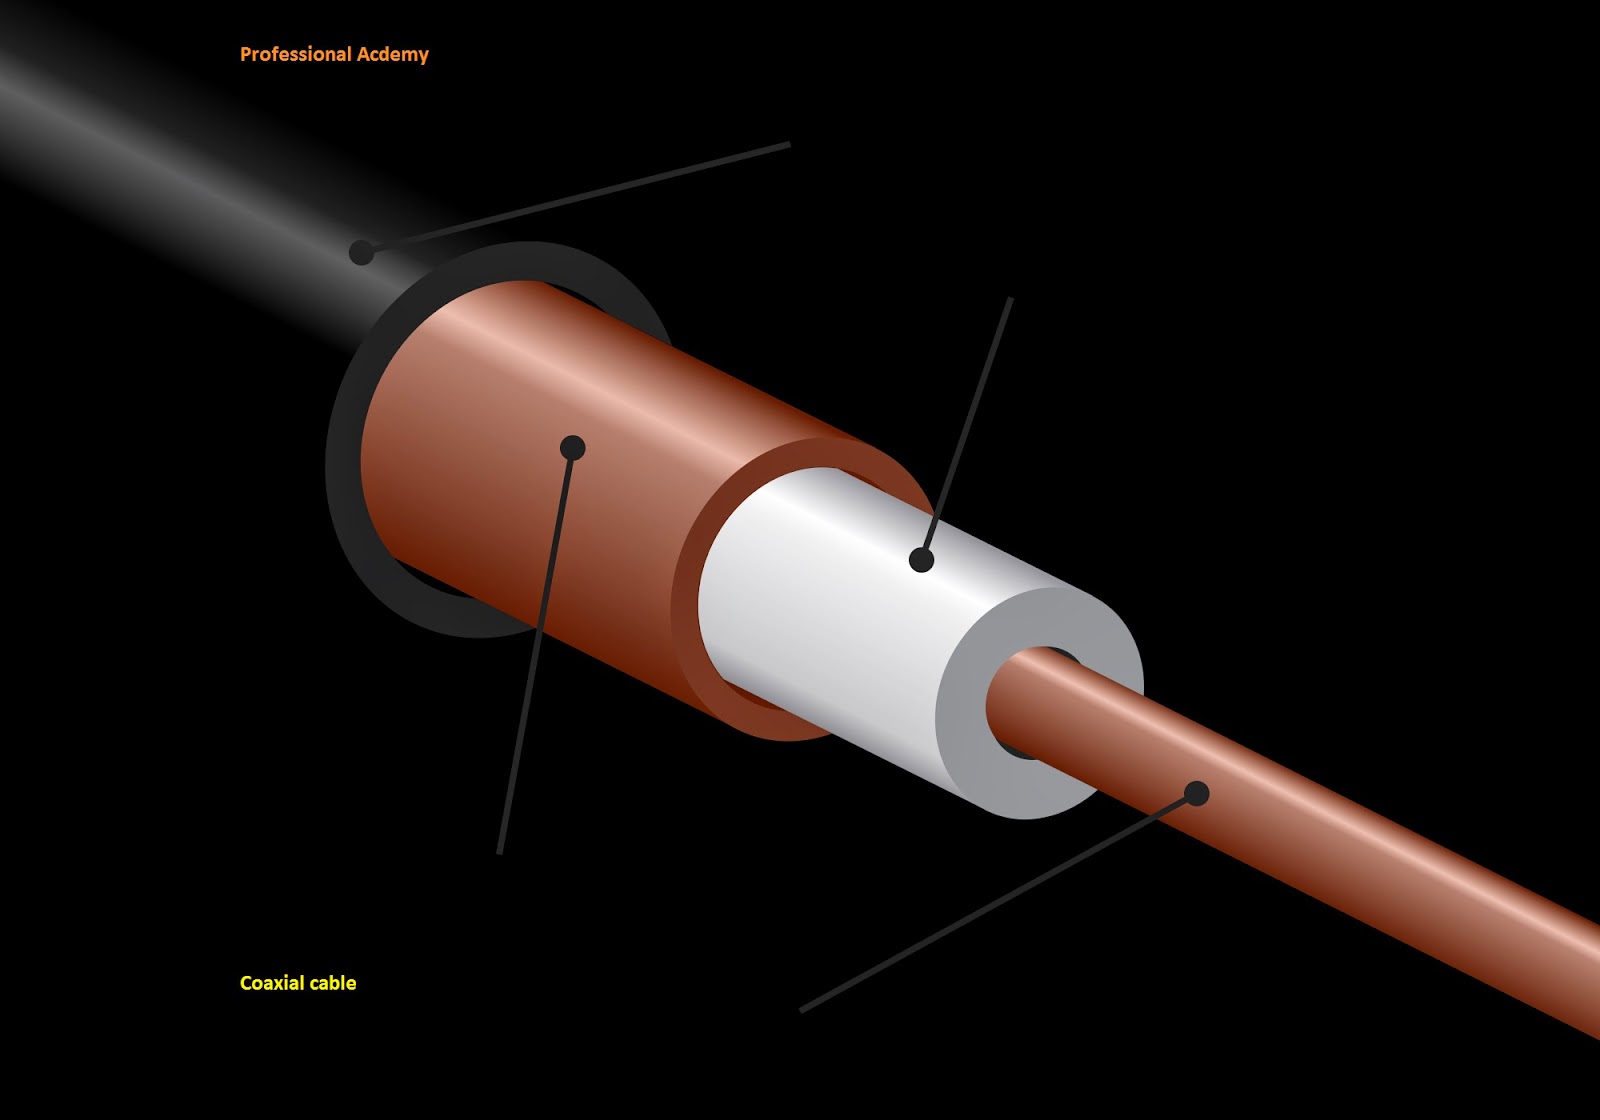 What is coaxial cable?